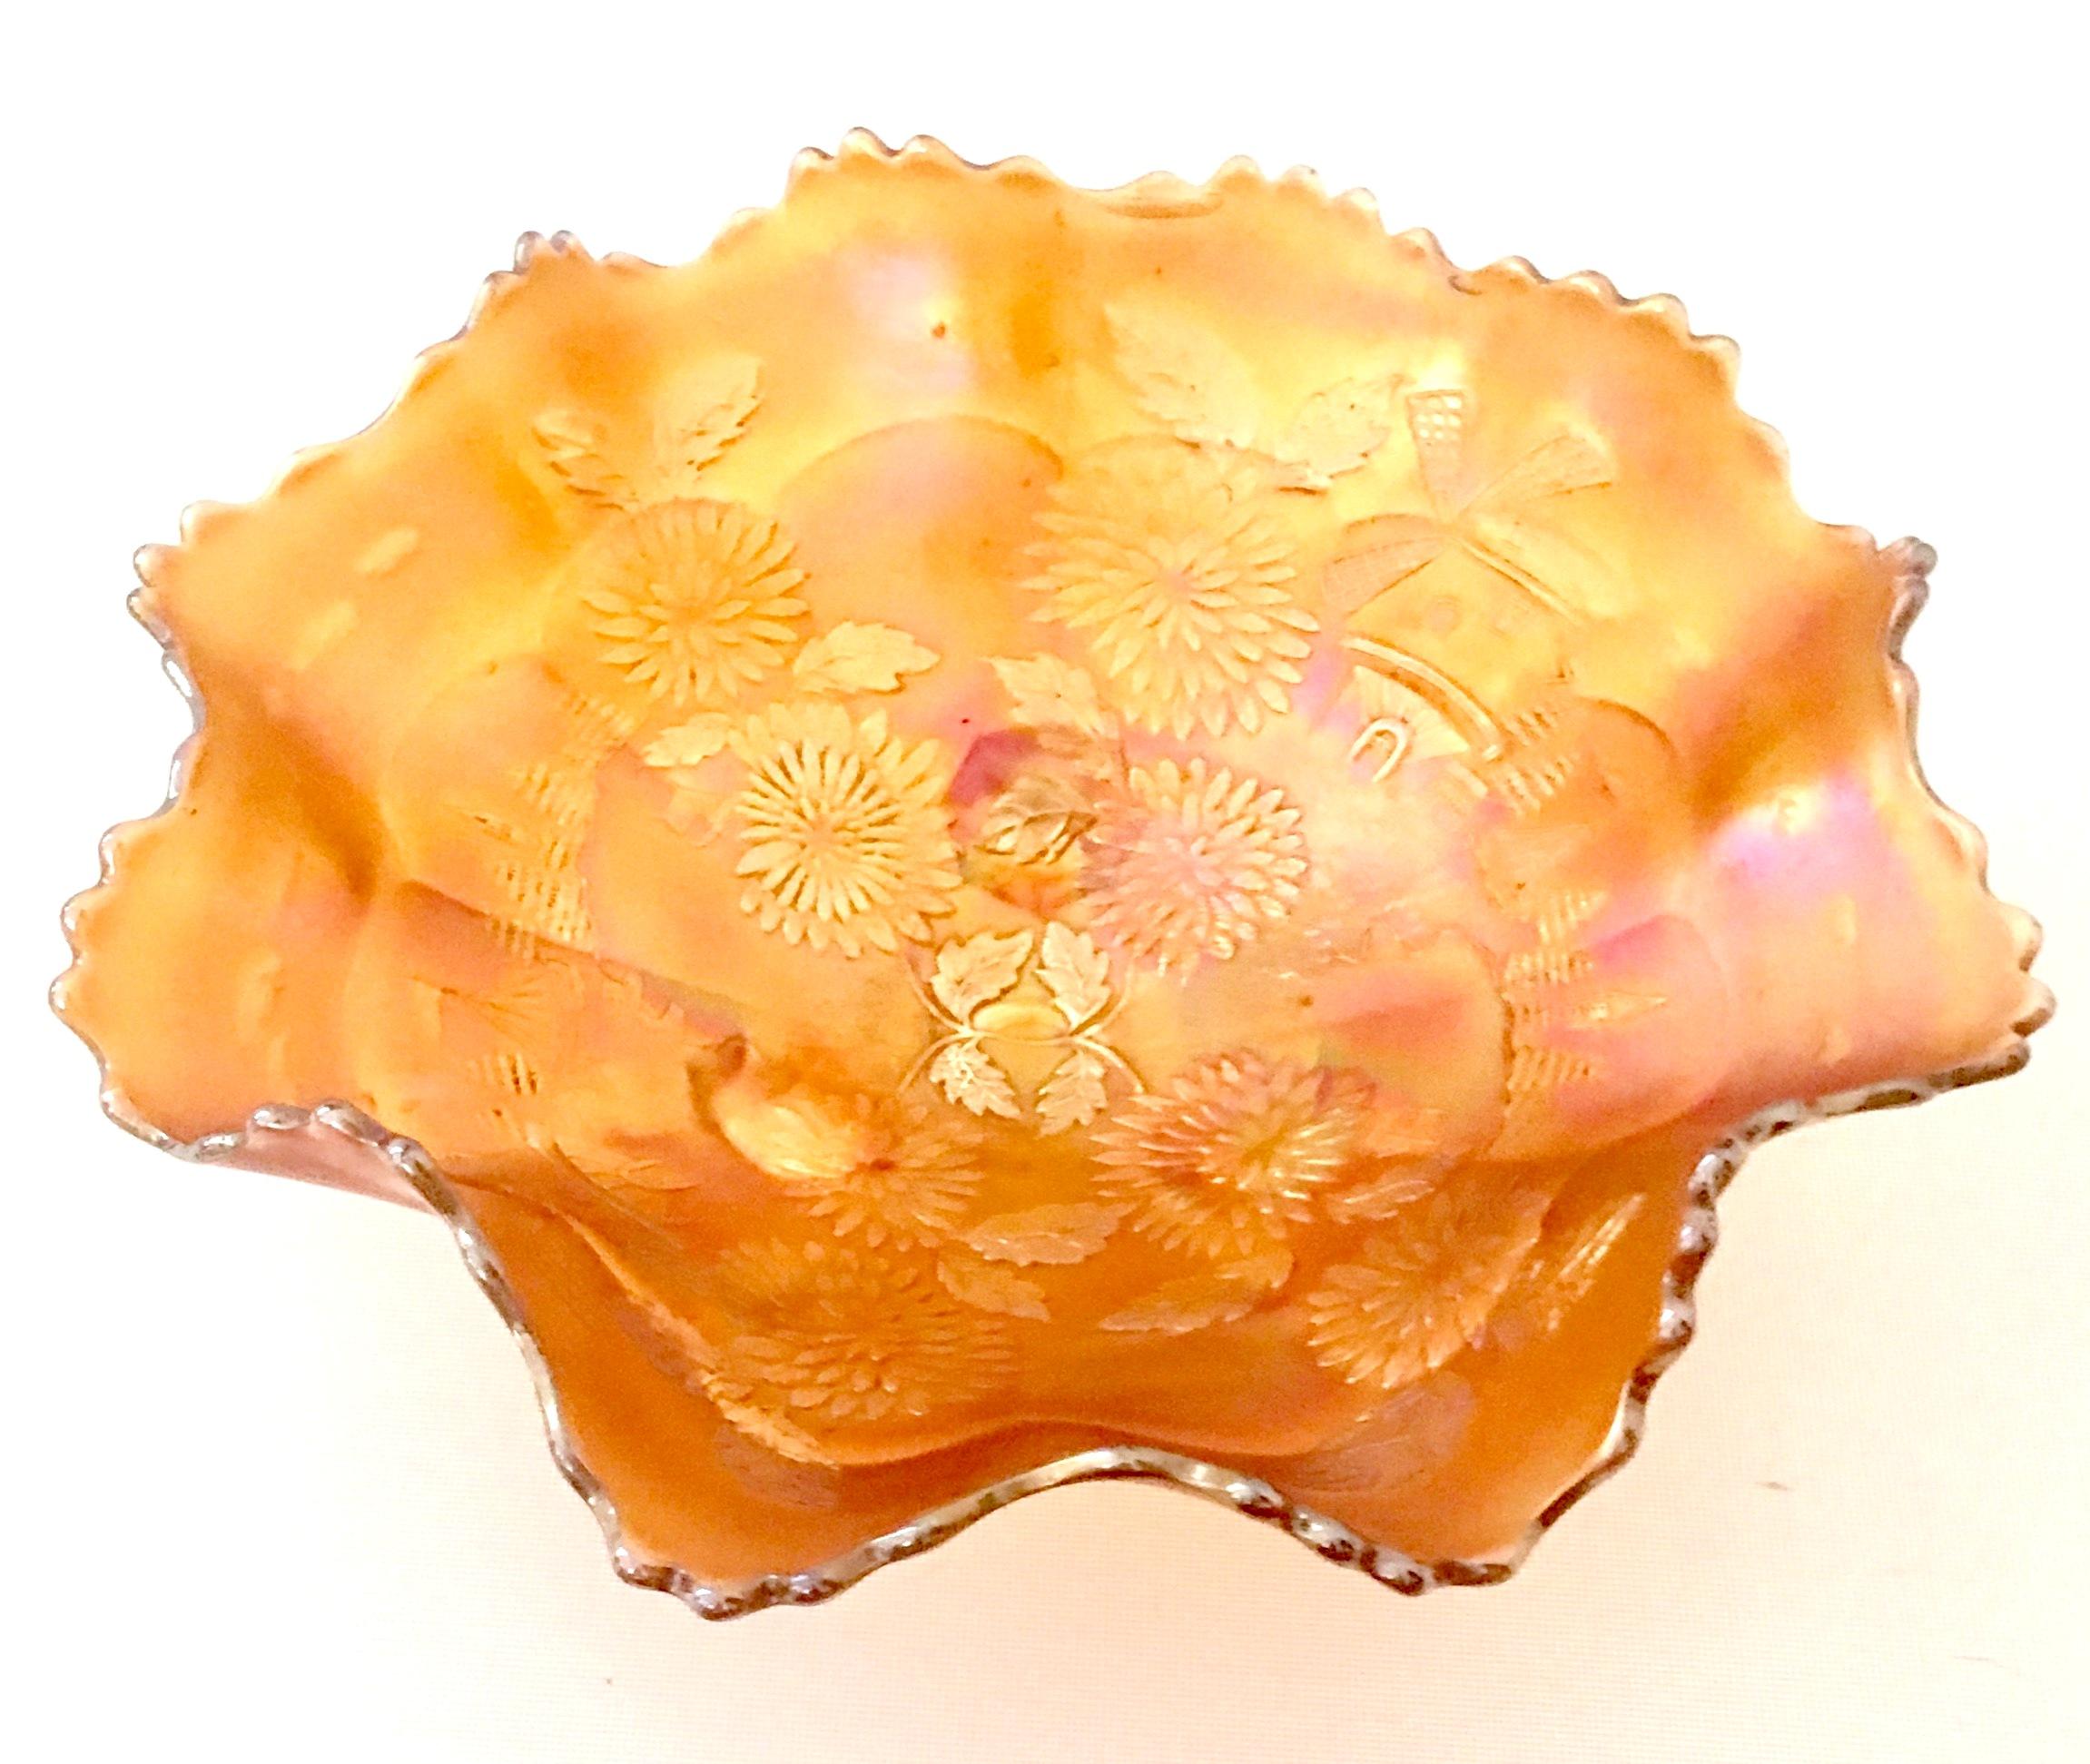 1930s American Art Glass iridescent Marigold Windmill Ruffle bowl by, Fenton. Features a lovely orange with pink iridescence shimmer, raised windmill, sail boat and chrysanthemum motif with three scroll and ball feet.
The Fenton Glass Pontil mark